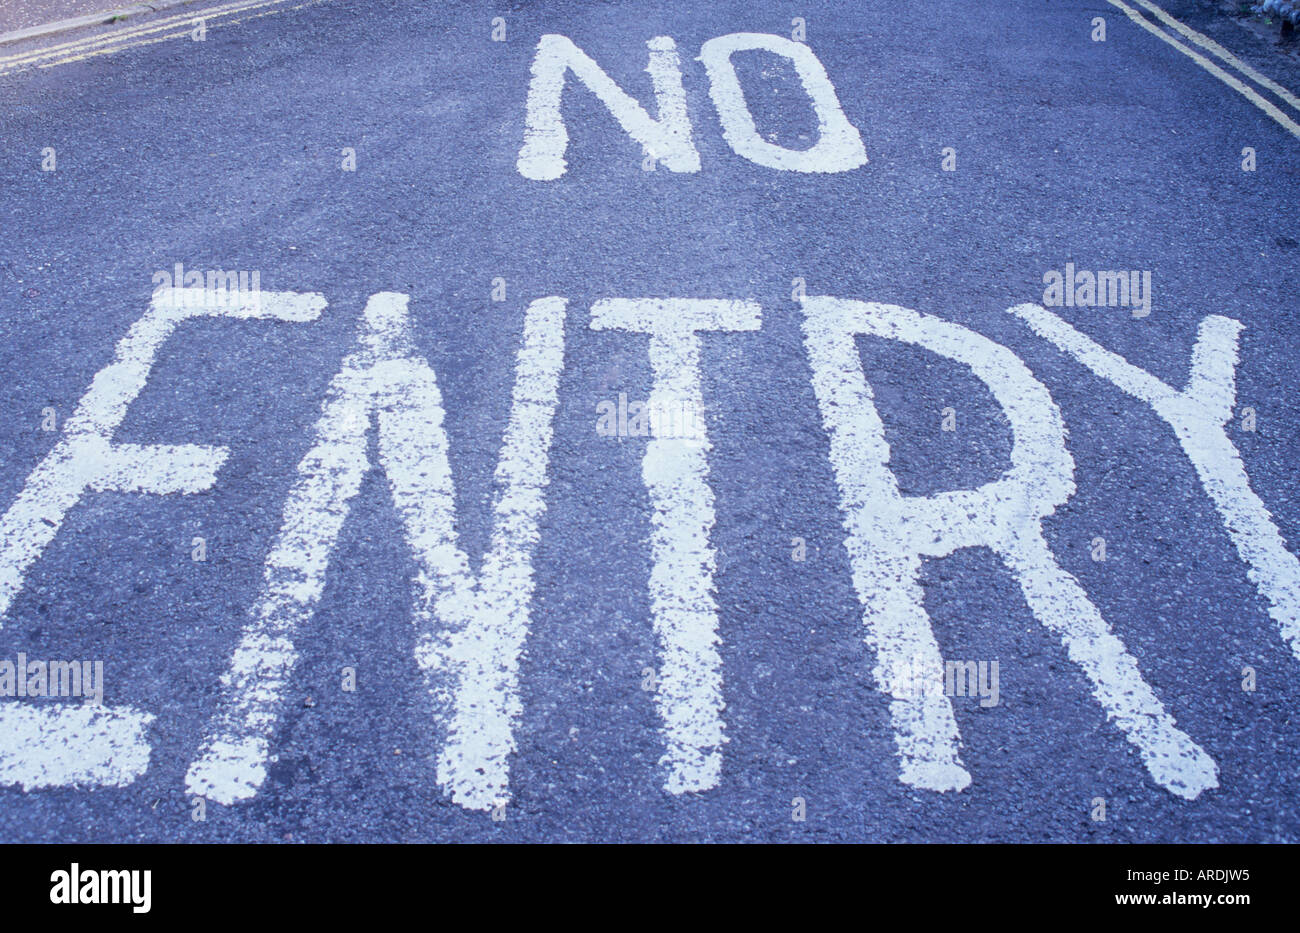 Wide angle view of the words No Entry painted in large letters on tarmac road surface with yellow lines also visible Stock Photo